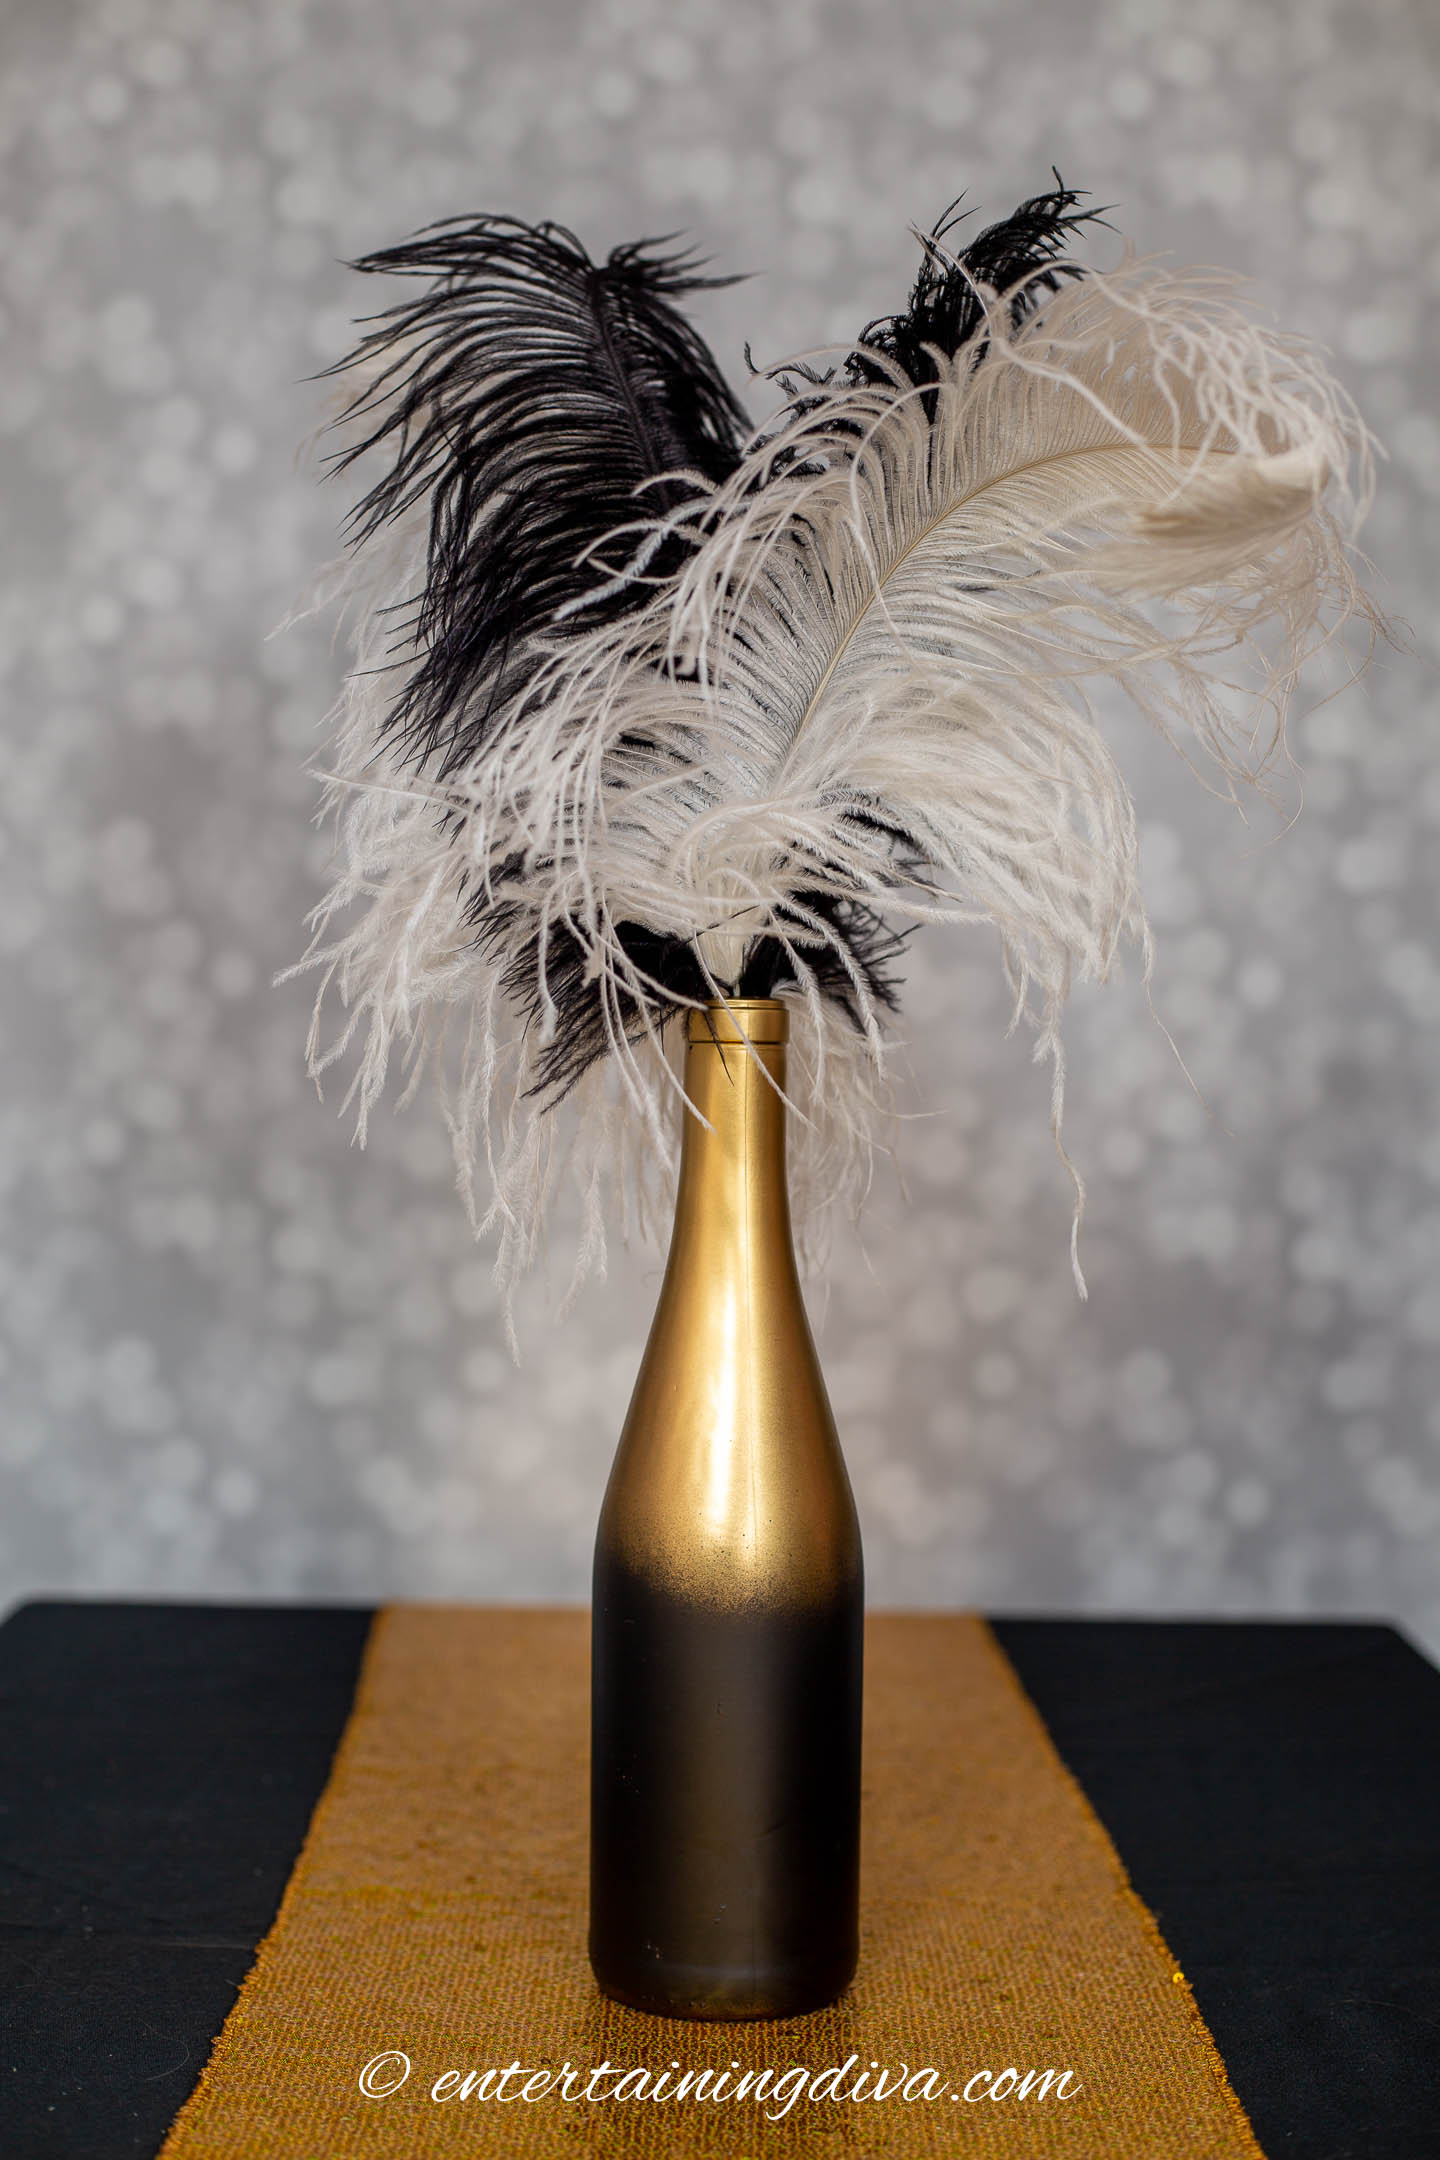 Wine bottle spray painted black and gold with white and black ostrich feathers in it